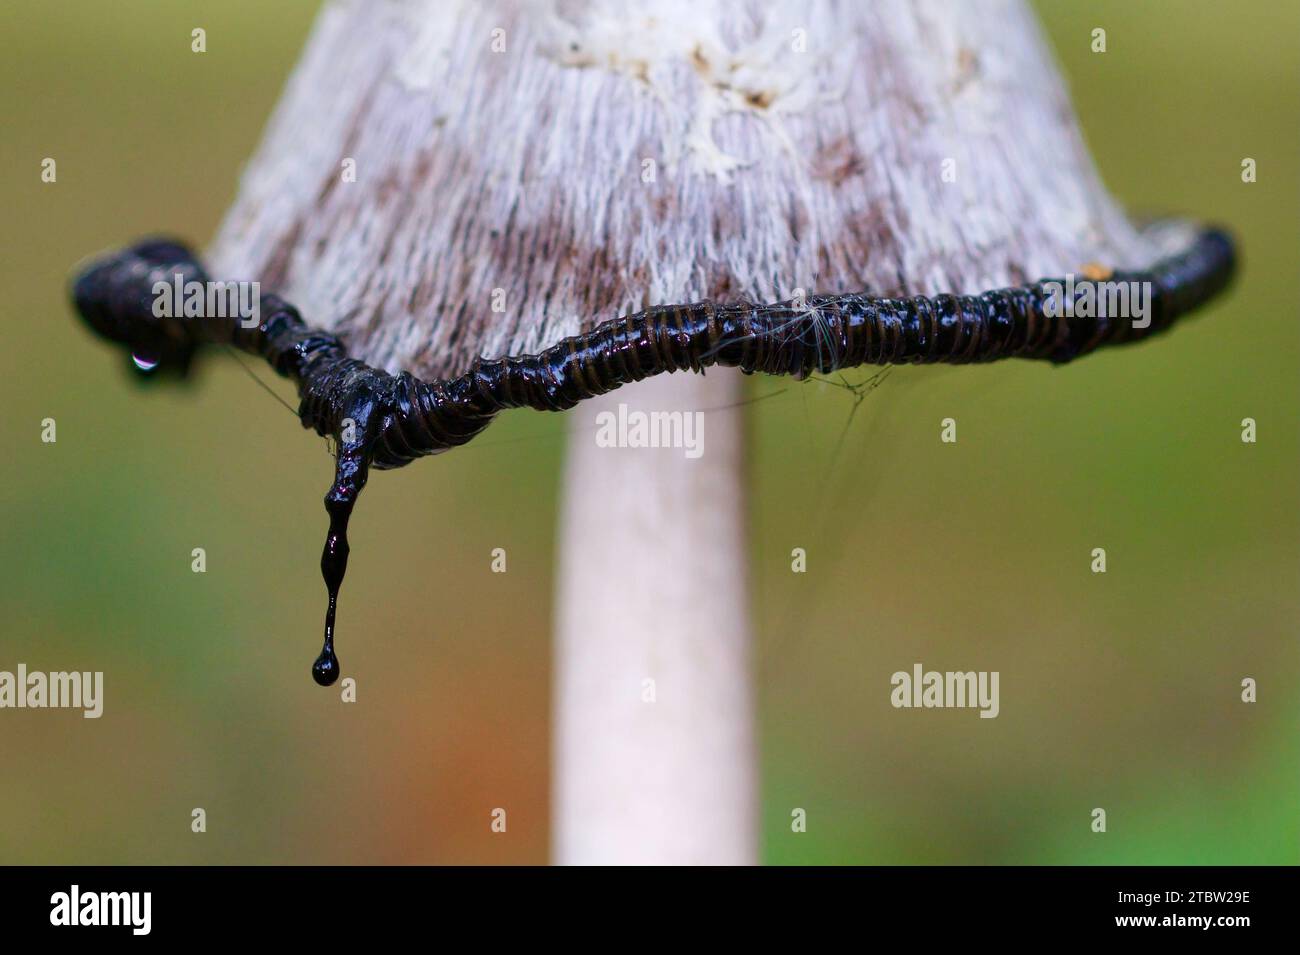 Black inky liquid drips from the cap of a shaggy ink cap mushroom, Coprinus comatus. The liquid is laden with spores, which wash away to new habitats Stock Photo